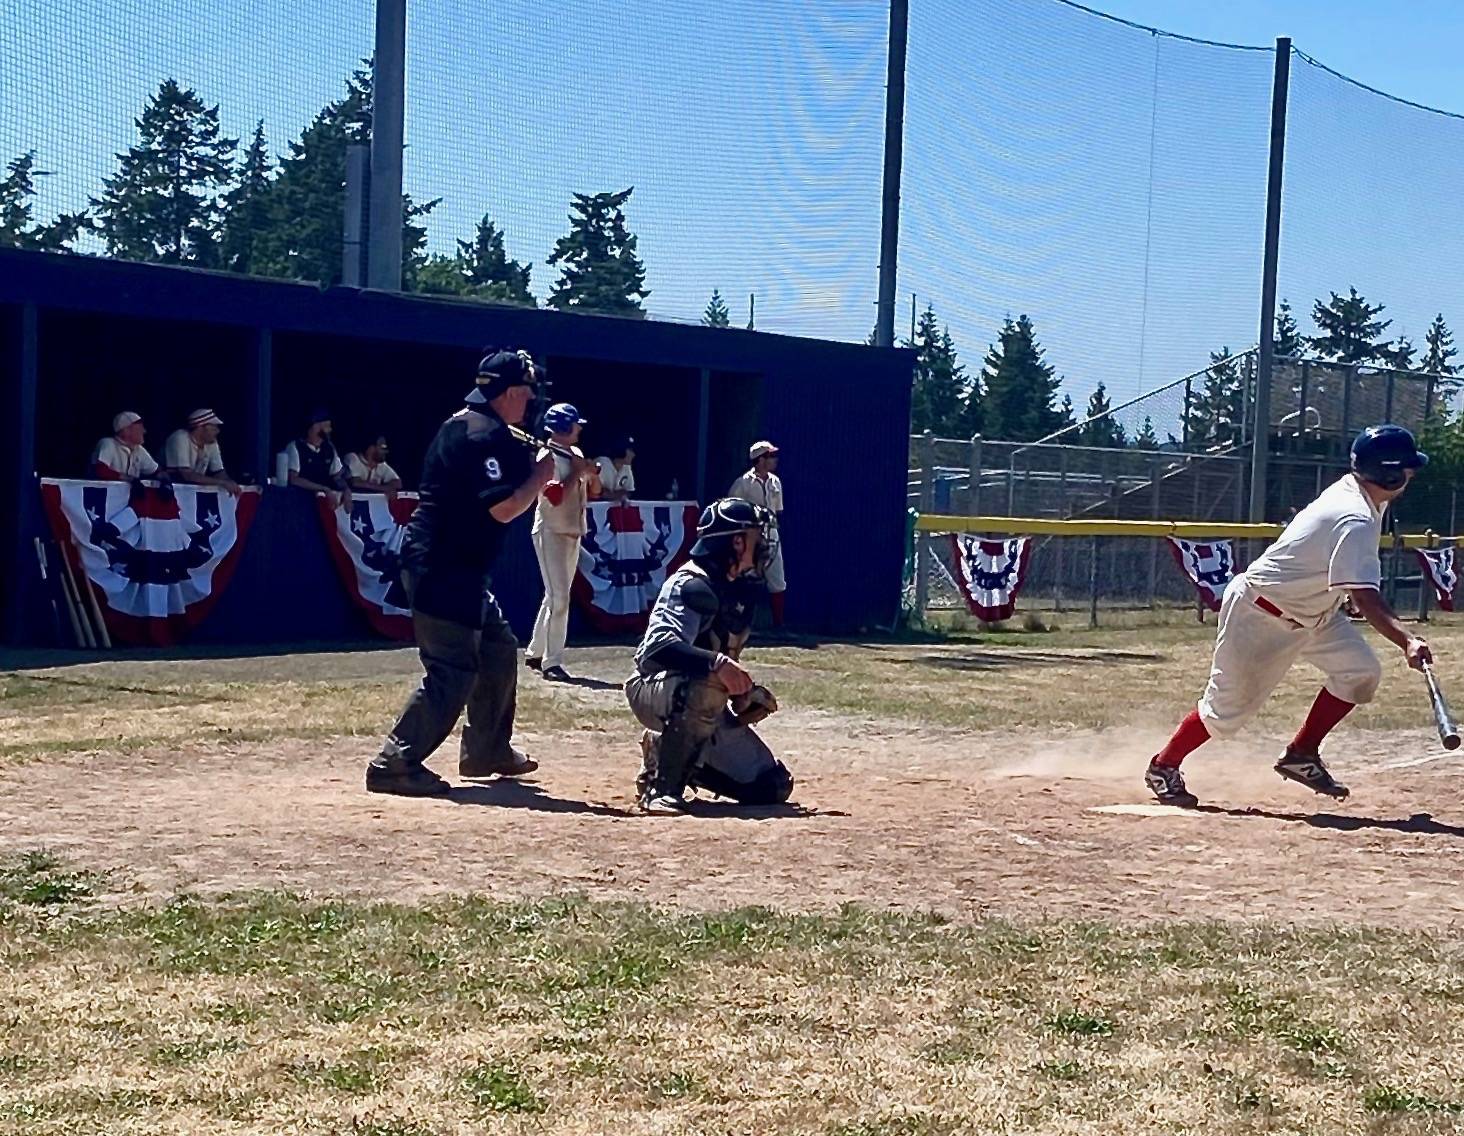 Ben Kussie digs out of the box for the Reds in the 18th annual old-timers and alumni Stars and Strikes game as MacKenzie Bond waits on deck. Bond tripled home Kussie in the bottom of the seventh to tie the game and send it to extra innings. (Photo courtesy Paimon Jaberi)